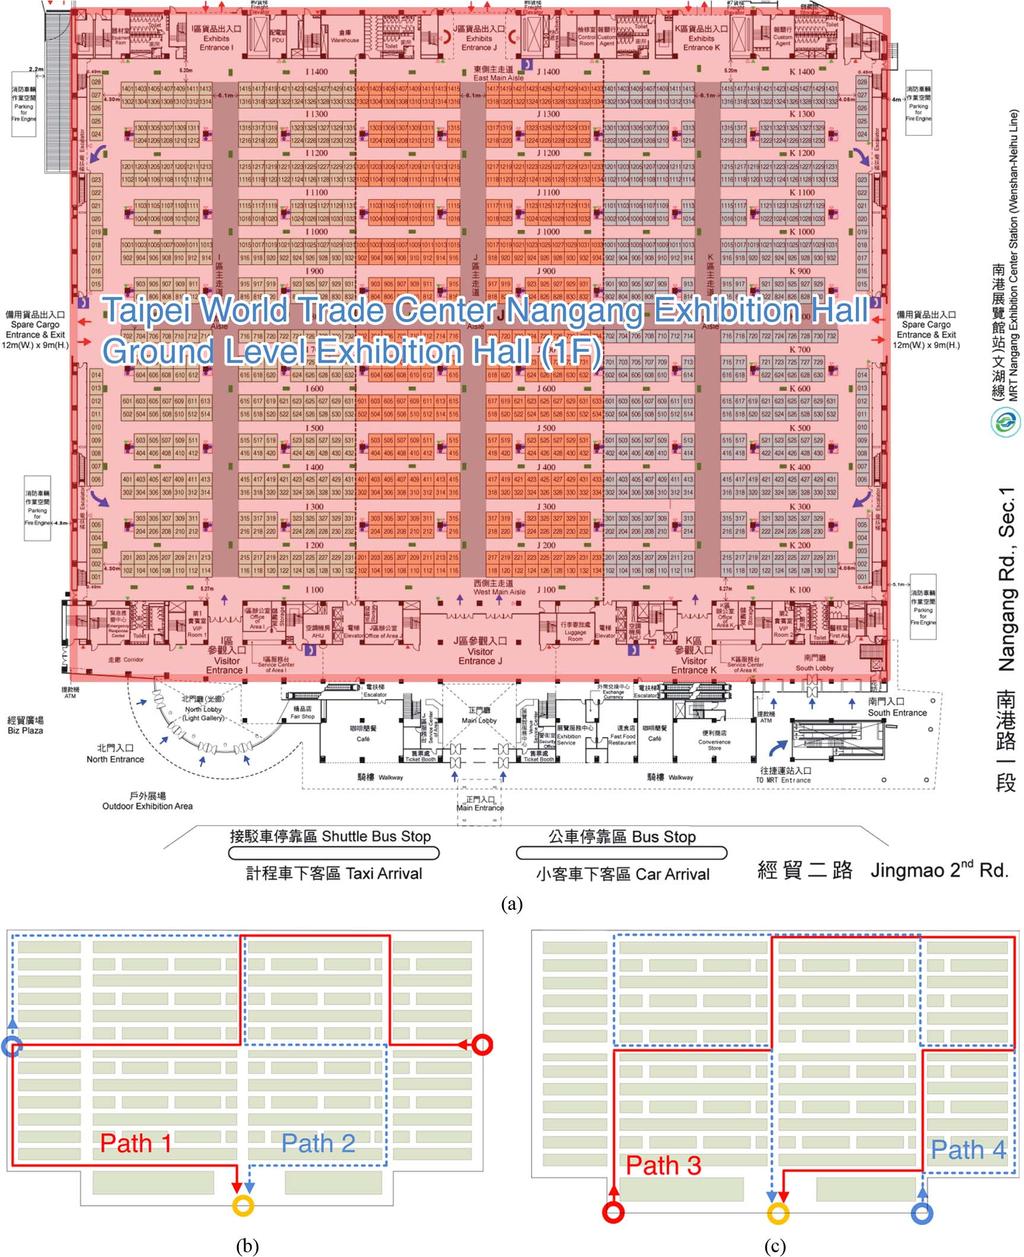 2772 IEEE TRANSACTIONS ON VEHICULAR TECHNOLOGY, VOL. 62, NO. 6, JULY 2013 Fig. 8. Taipei World Trade Center s Nangang Exhibition Hall. (a) Floor plan. (b) Recommended paths 1 and 2.